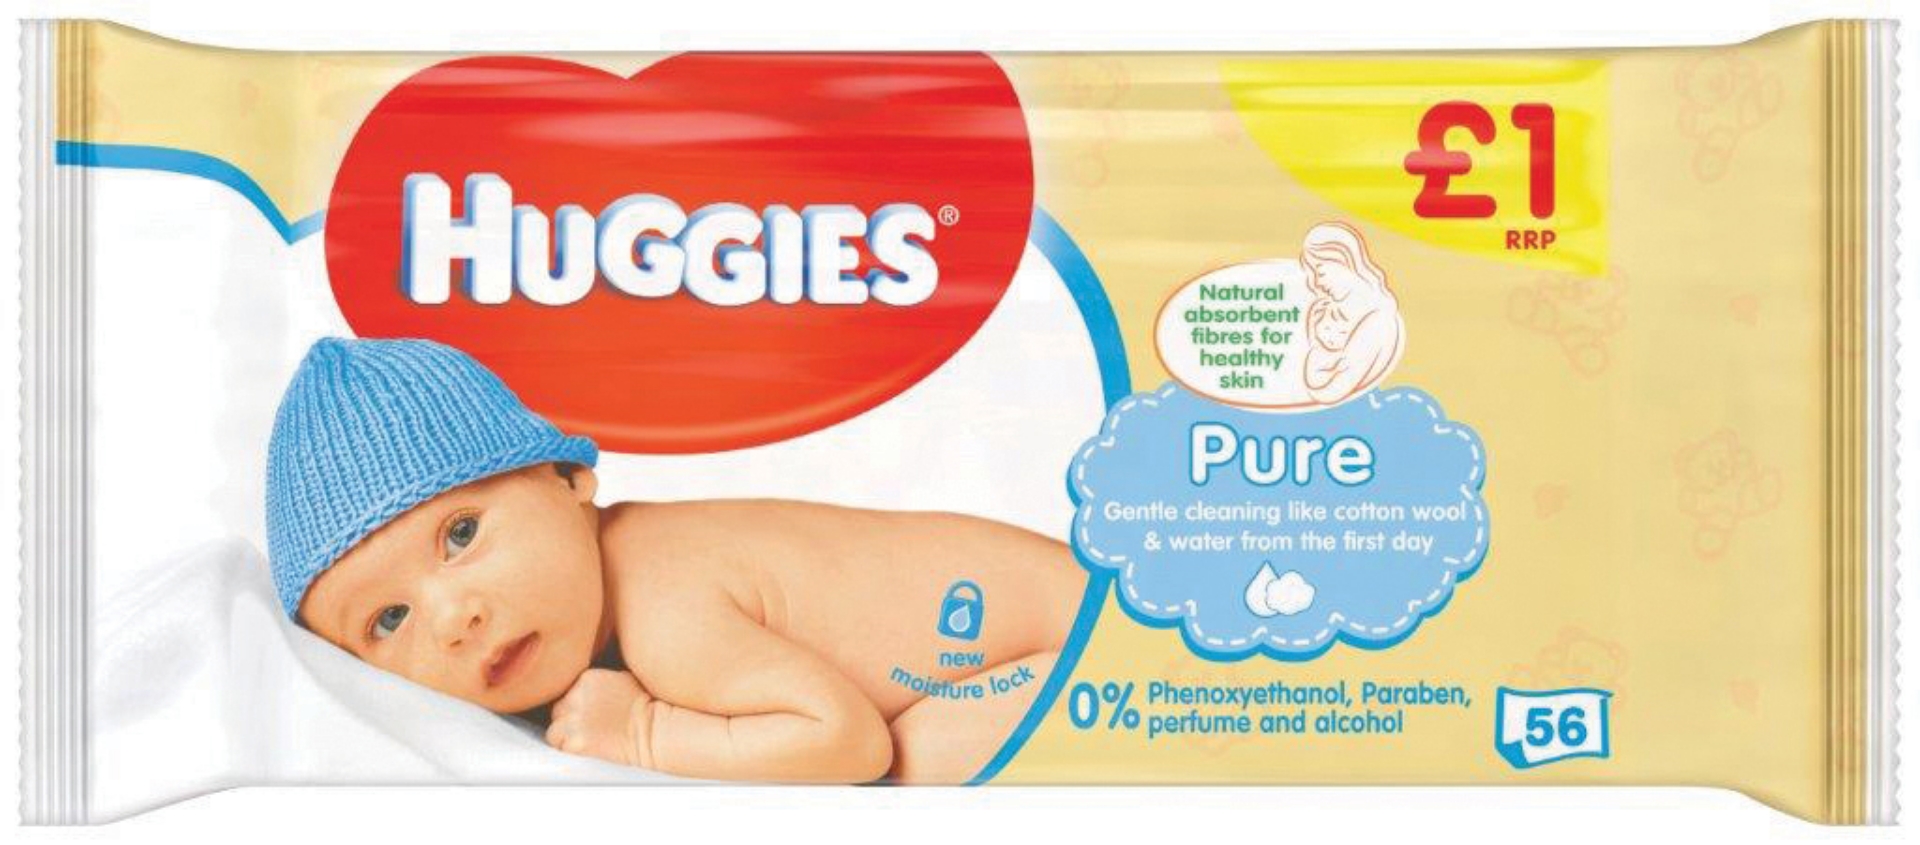 Picture of HUGGIES BABY WIPES - PURE PM1.00 (wsl)